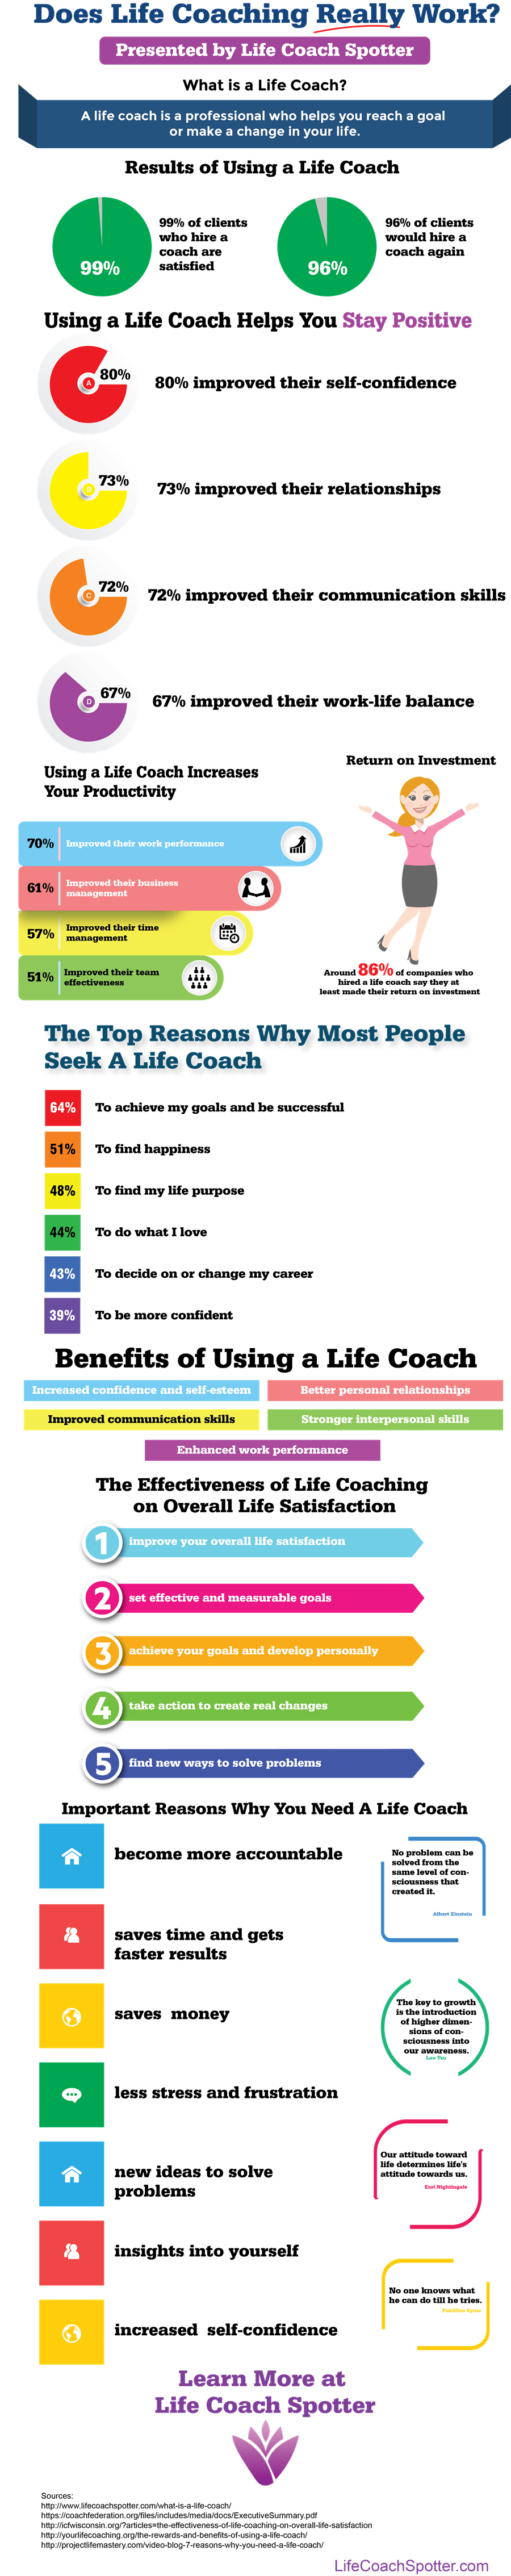 Does life coaching really work?